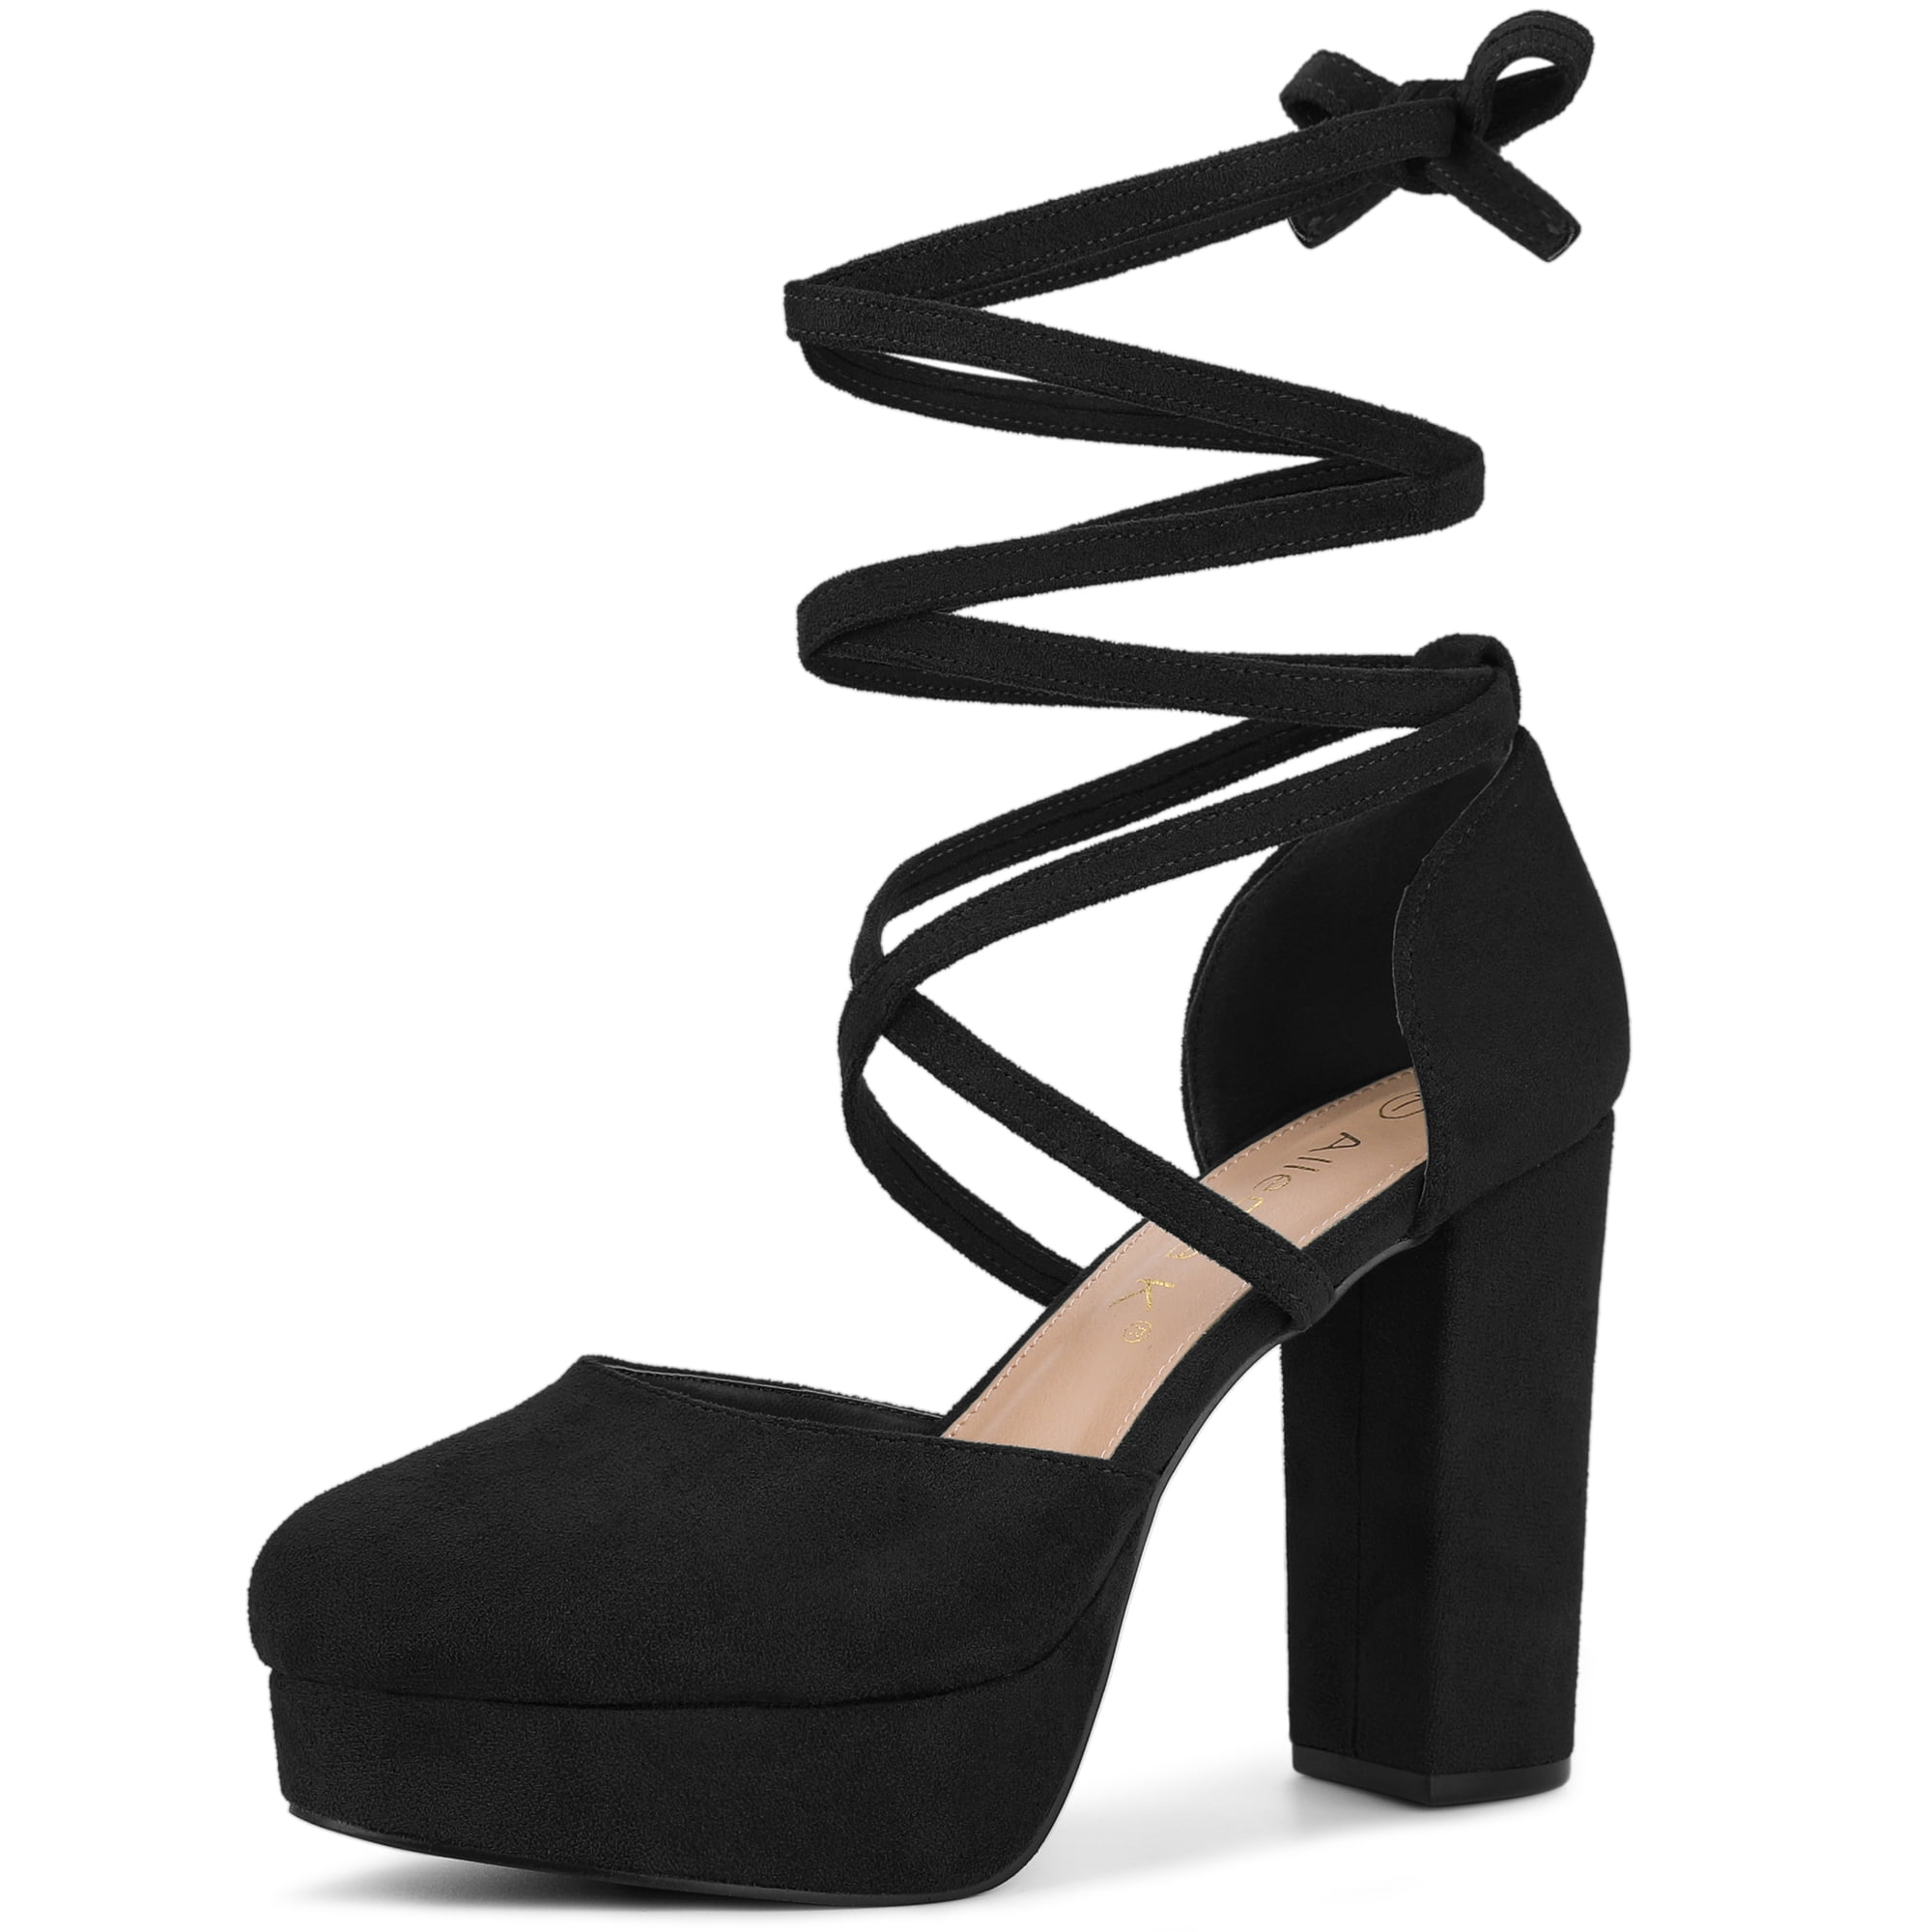 Barely There Heels | Ankle Strap Heels